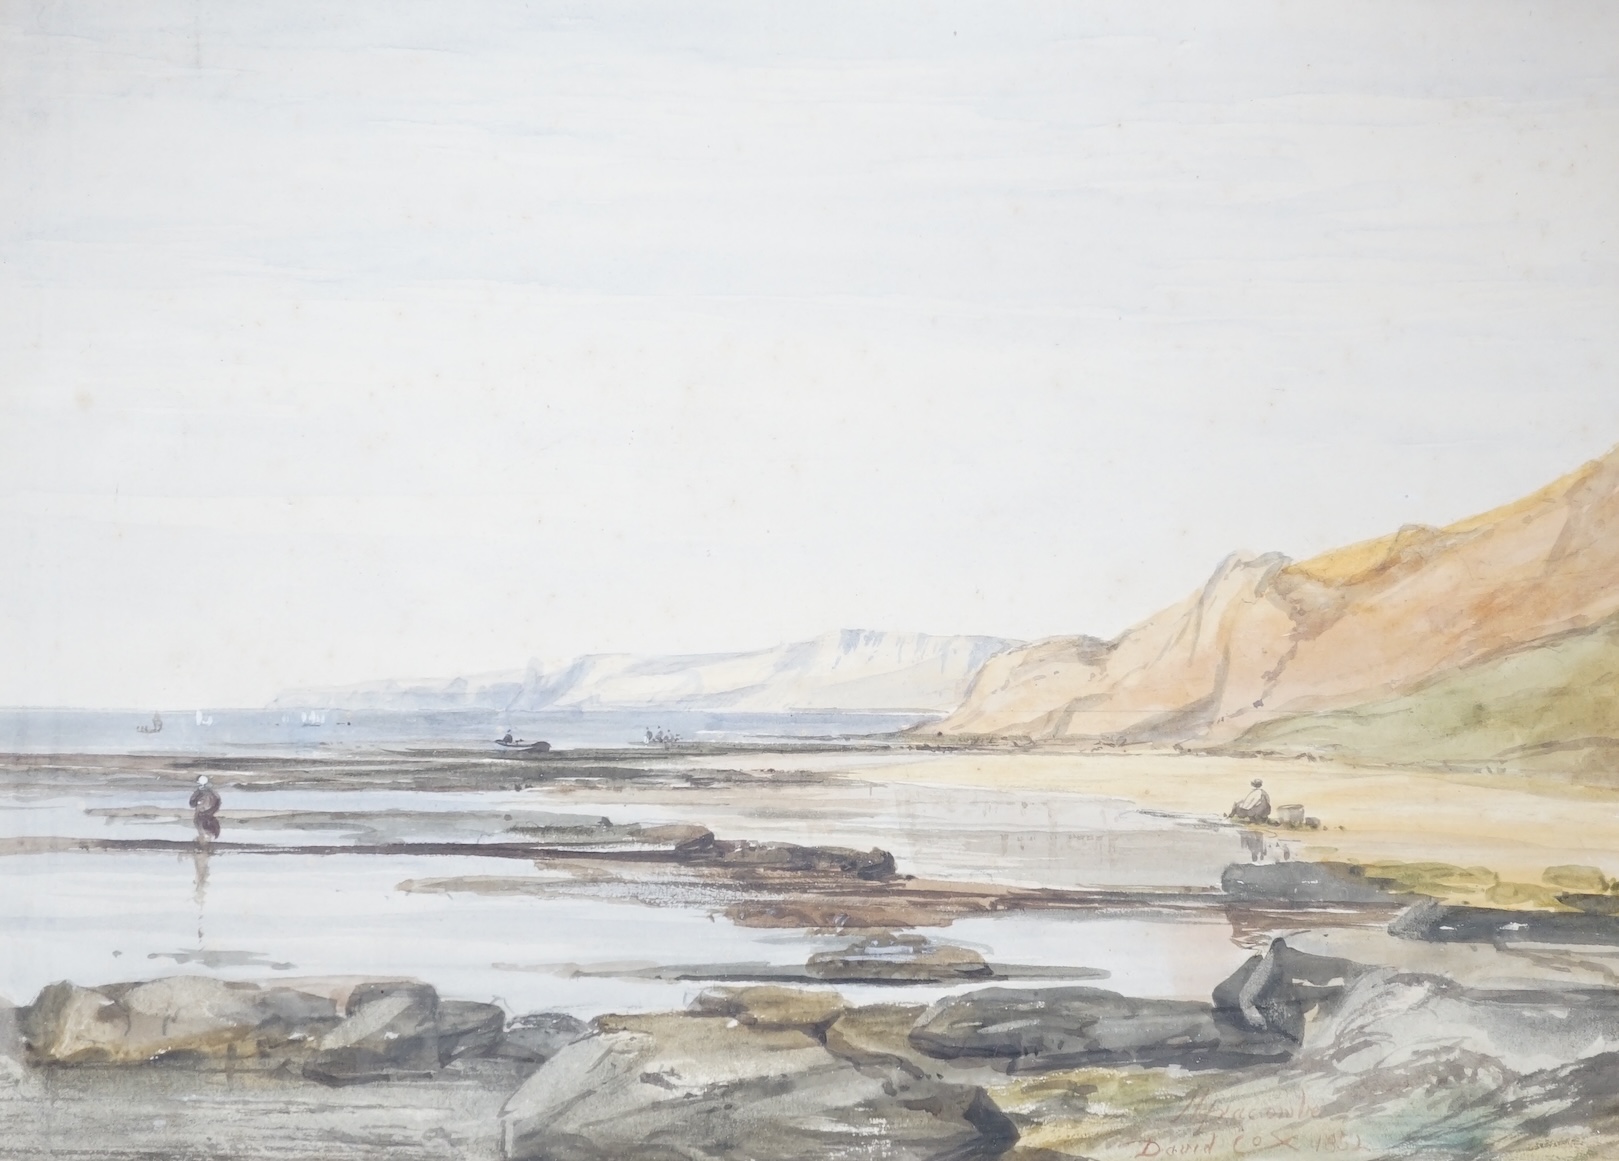 David Cox Jnr (1809-1885), watercolour, Coastal view with figures, signed and dated 1852, 24 x 34cm. Condition - poor to fair, foxing